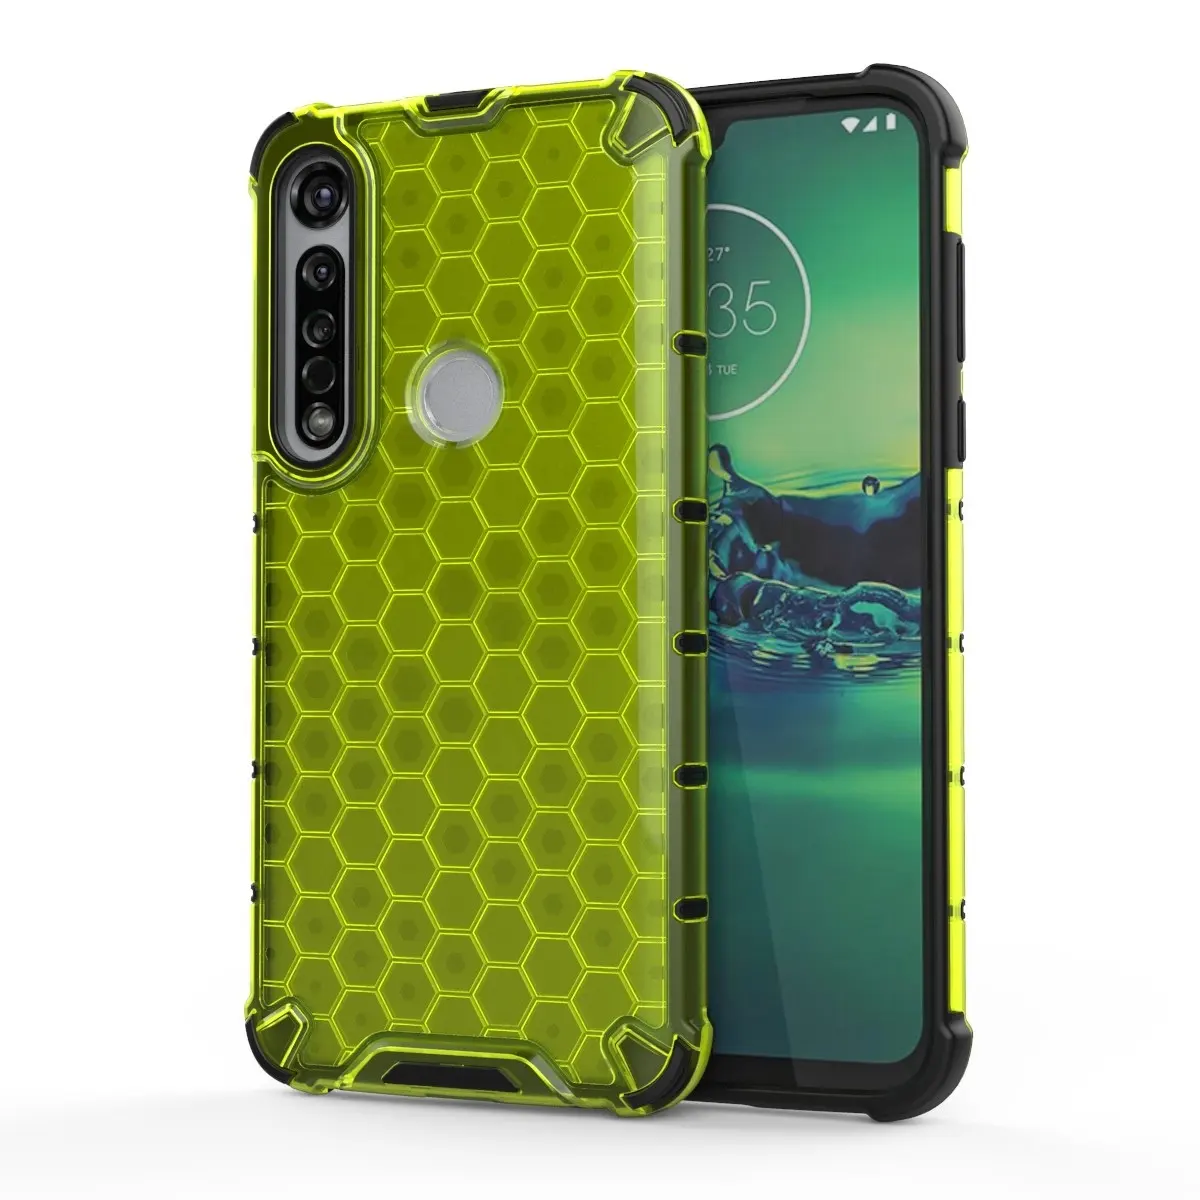 Mobile Accessories Honeycomb Shockproof 2in1 PC Phone Case Back Cover with TPU Frame for Motorola Moto G8 Plus E5 Play Go G6 E6